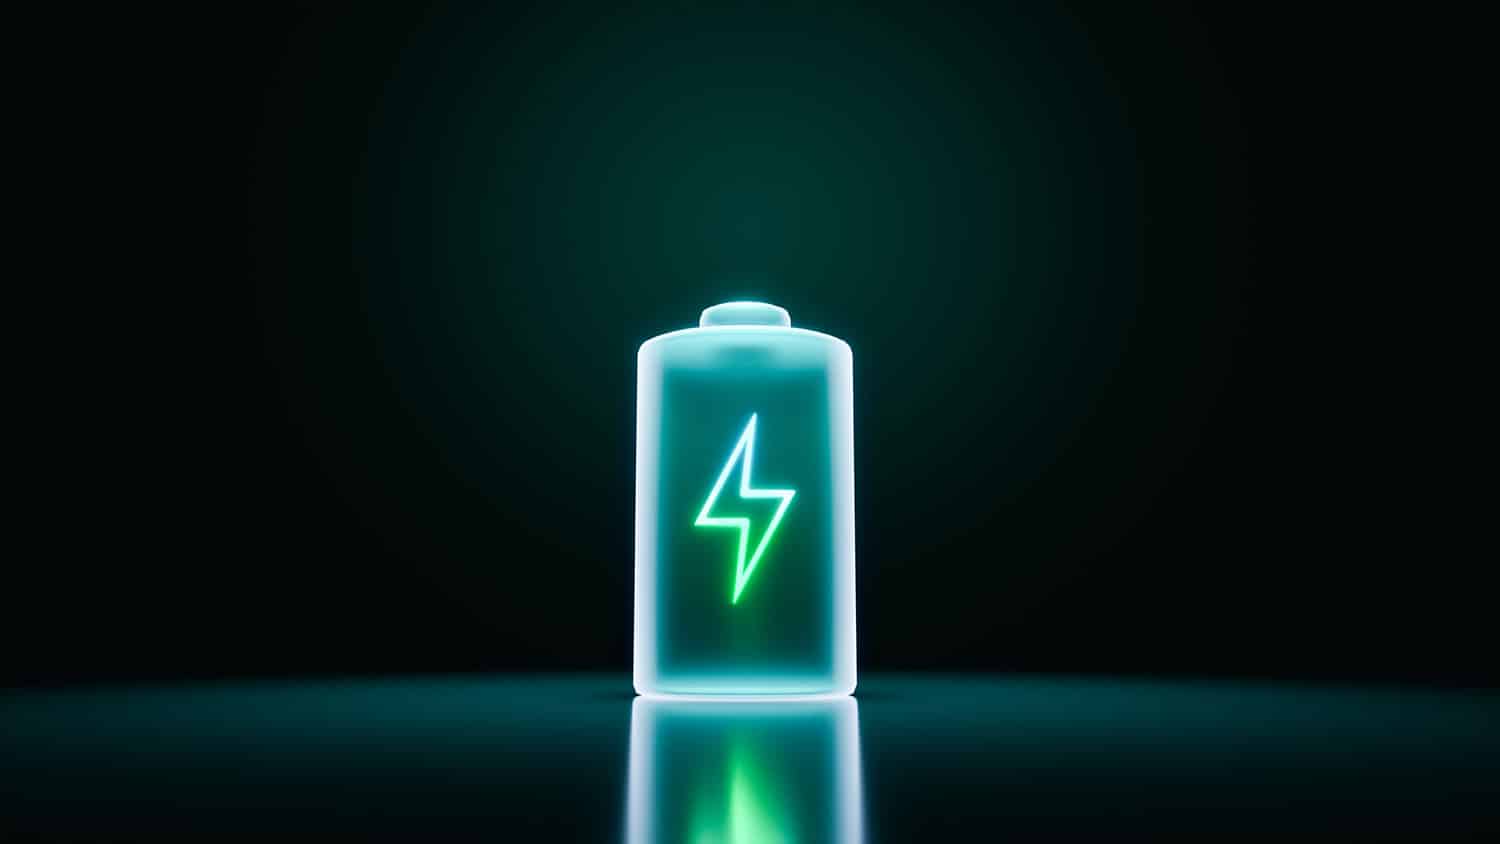 Lighter lithium-sulphur battery lowers costs and lasts longer